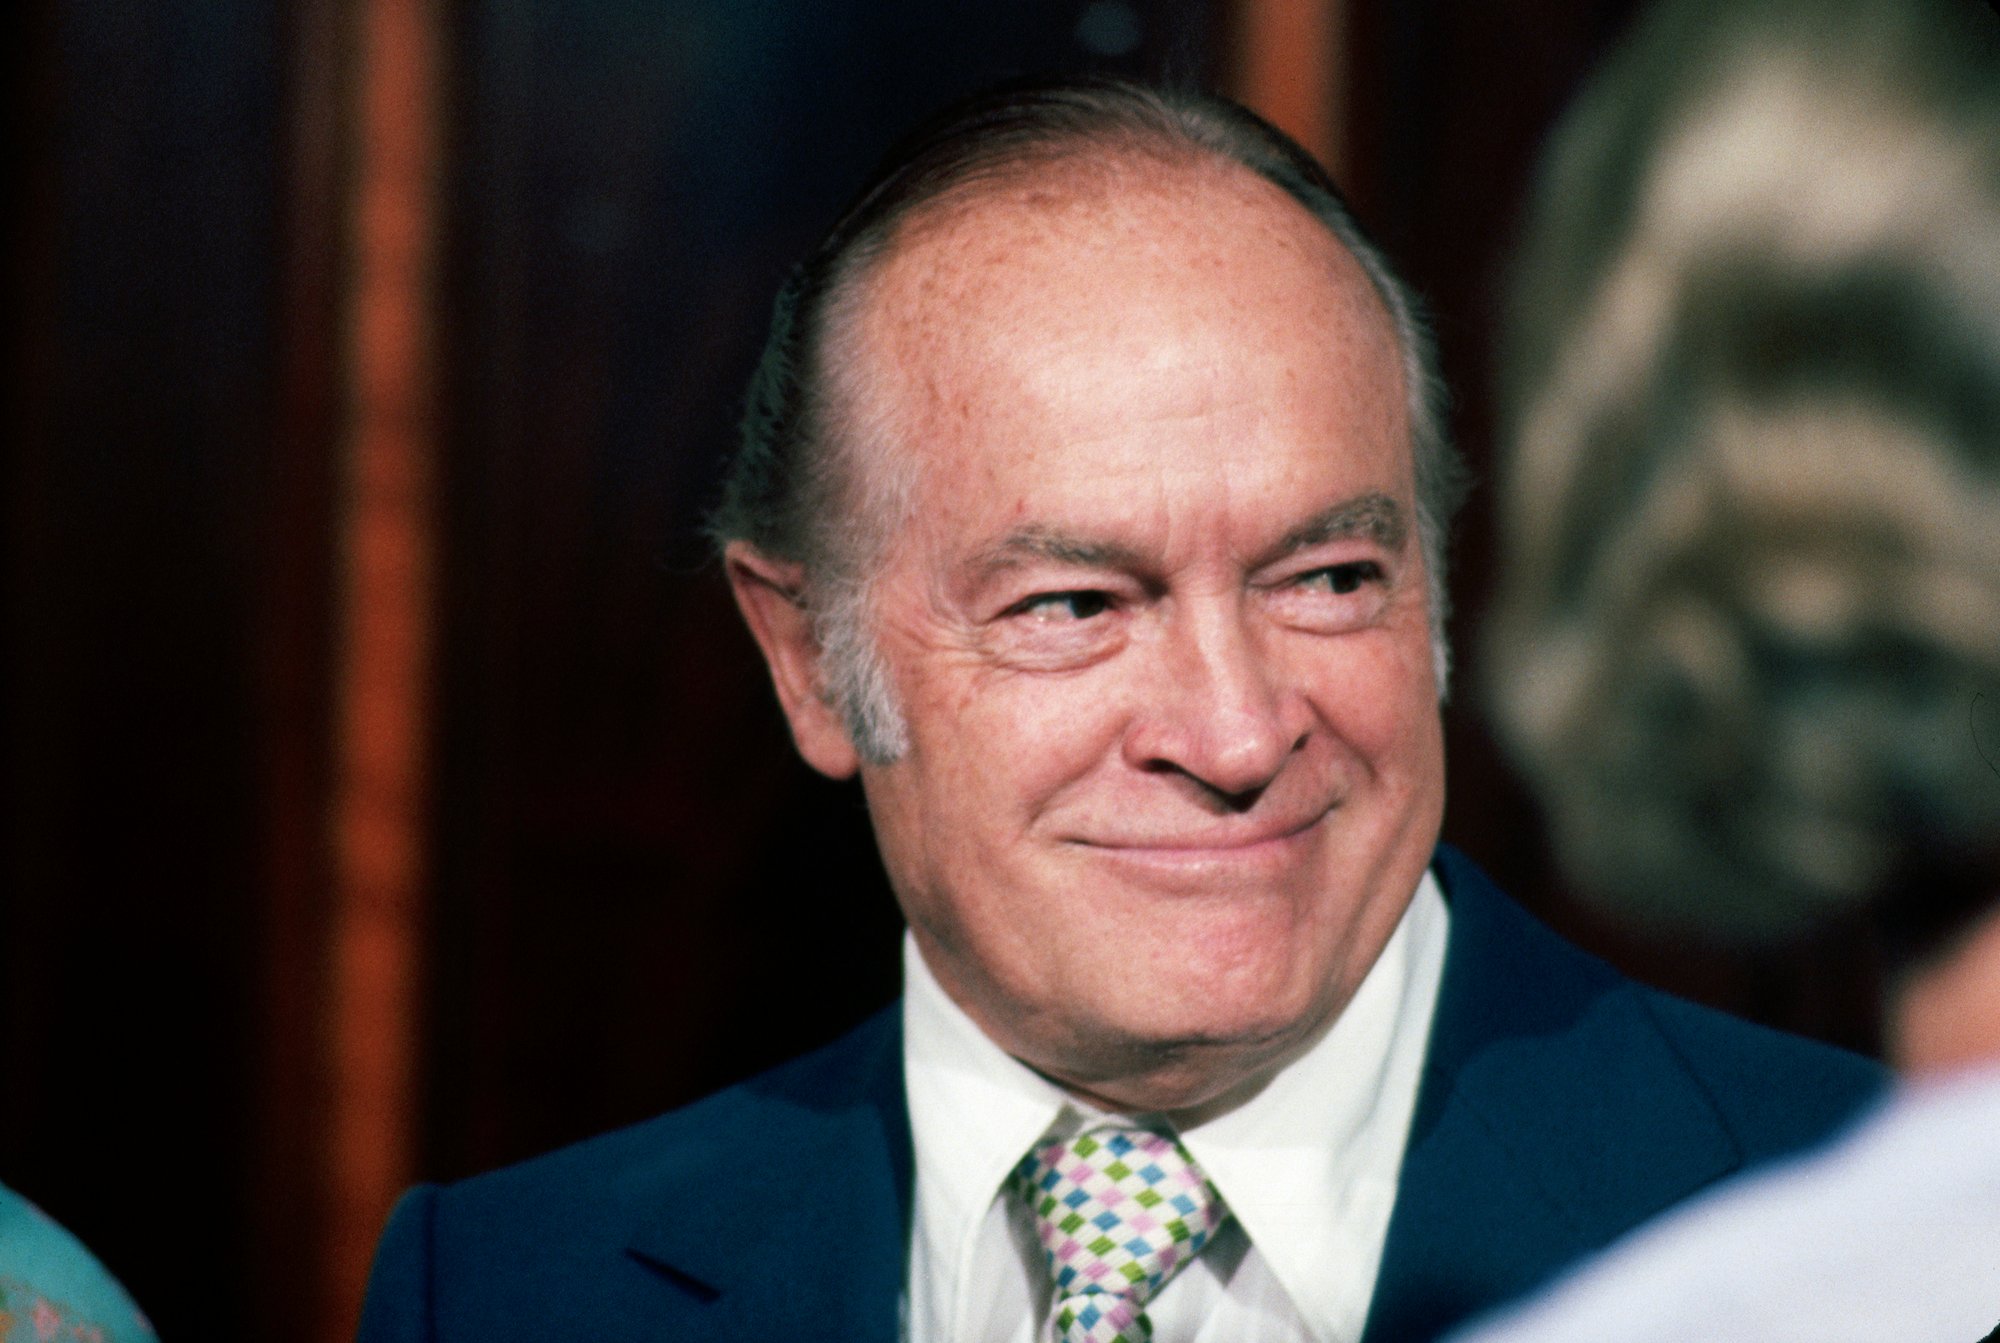 Bob Hope smiling looking to the right in front of a blurred background